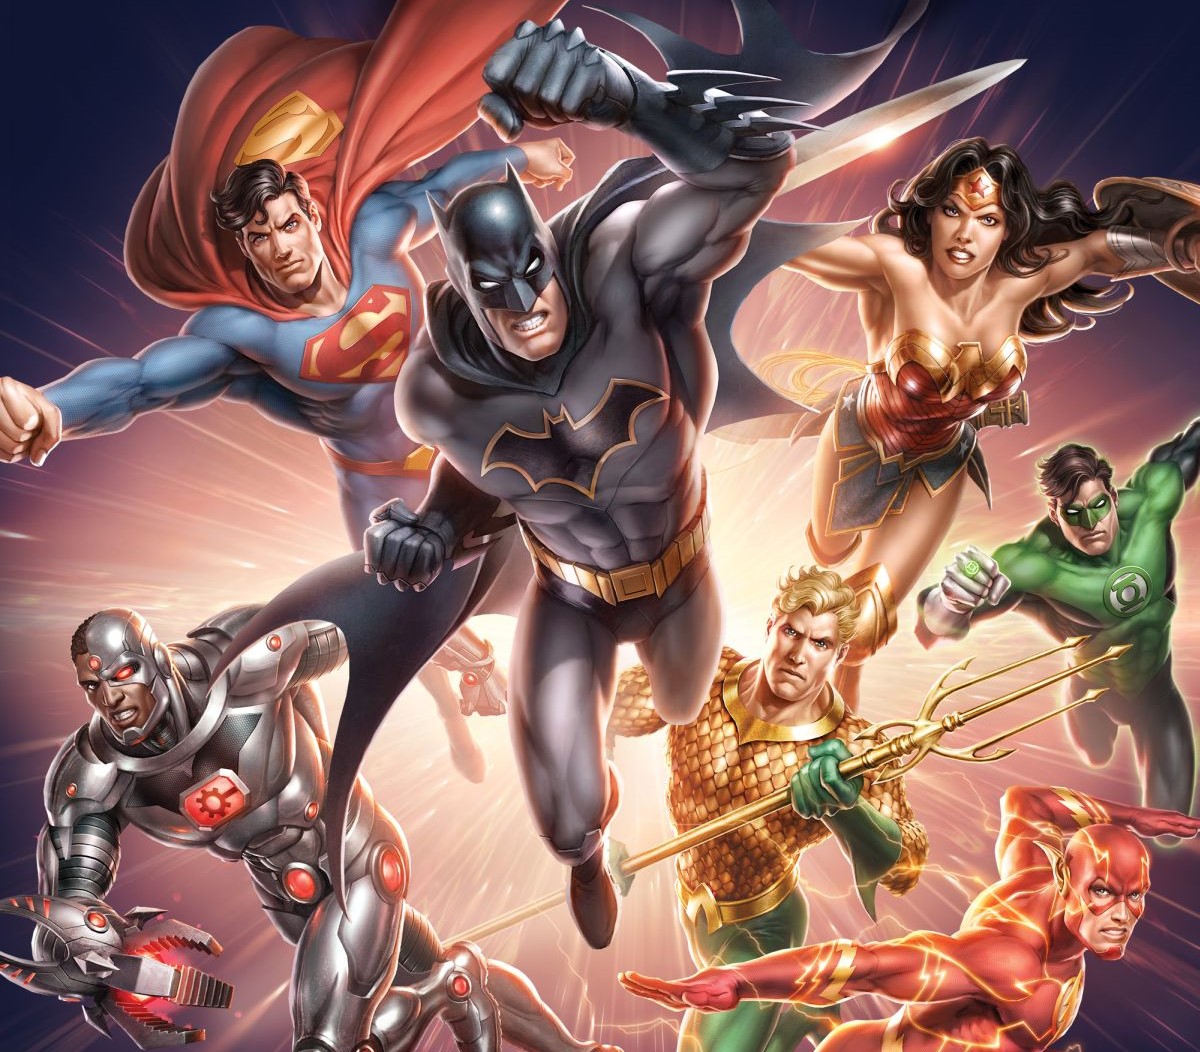 DC Announces 'Red Son', 'Justice League Dark' and 'Man of Tomorrow' Animated  Movies - Movie News Net